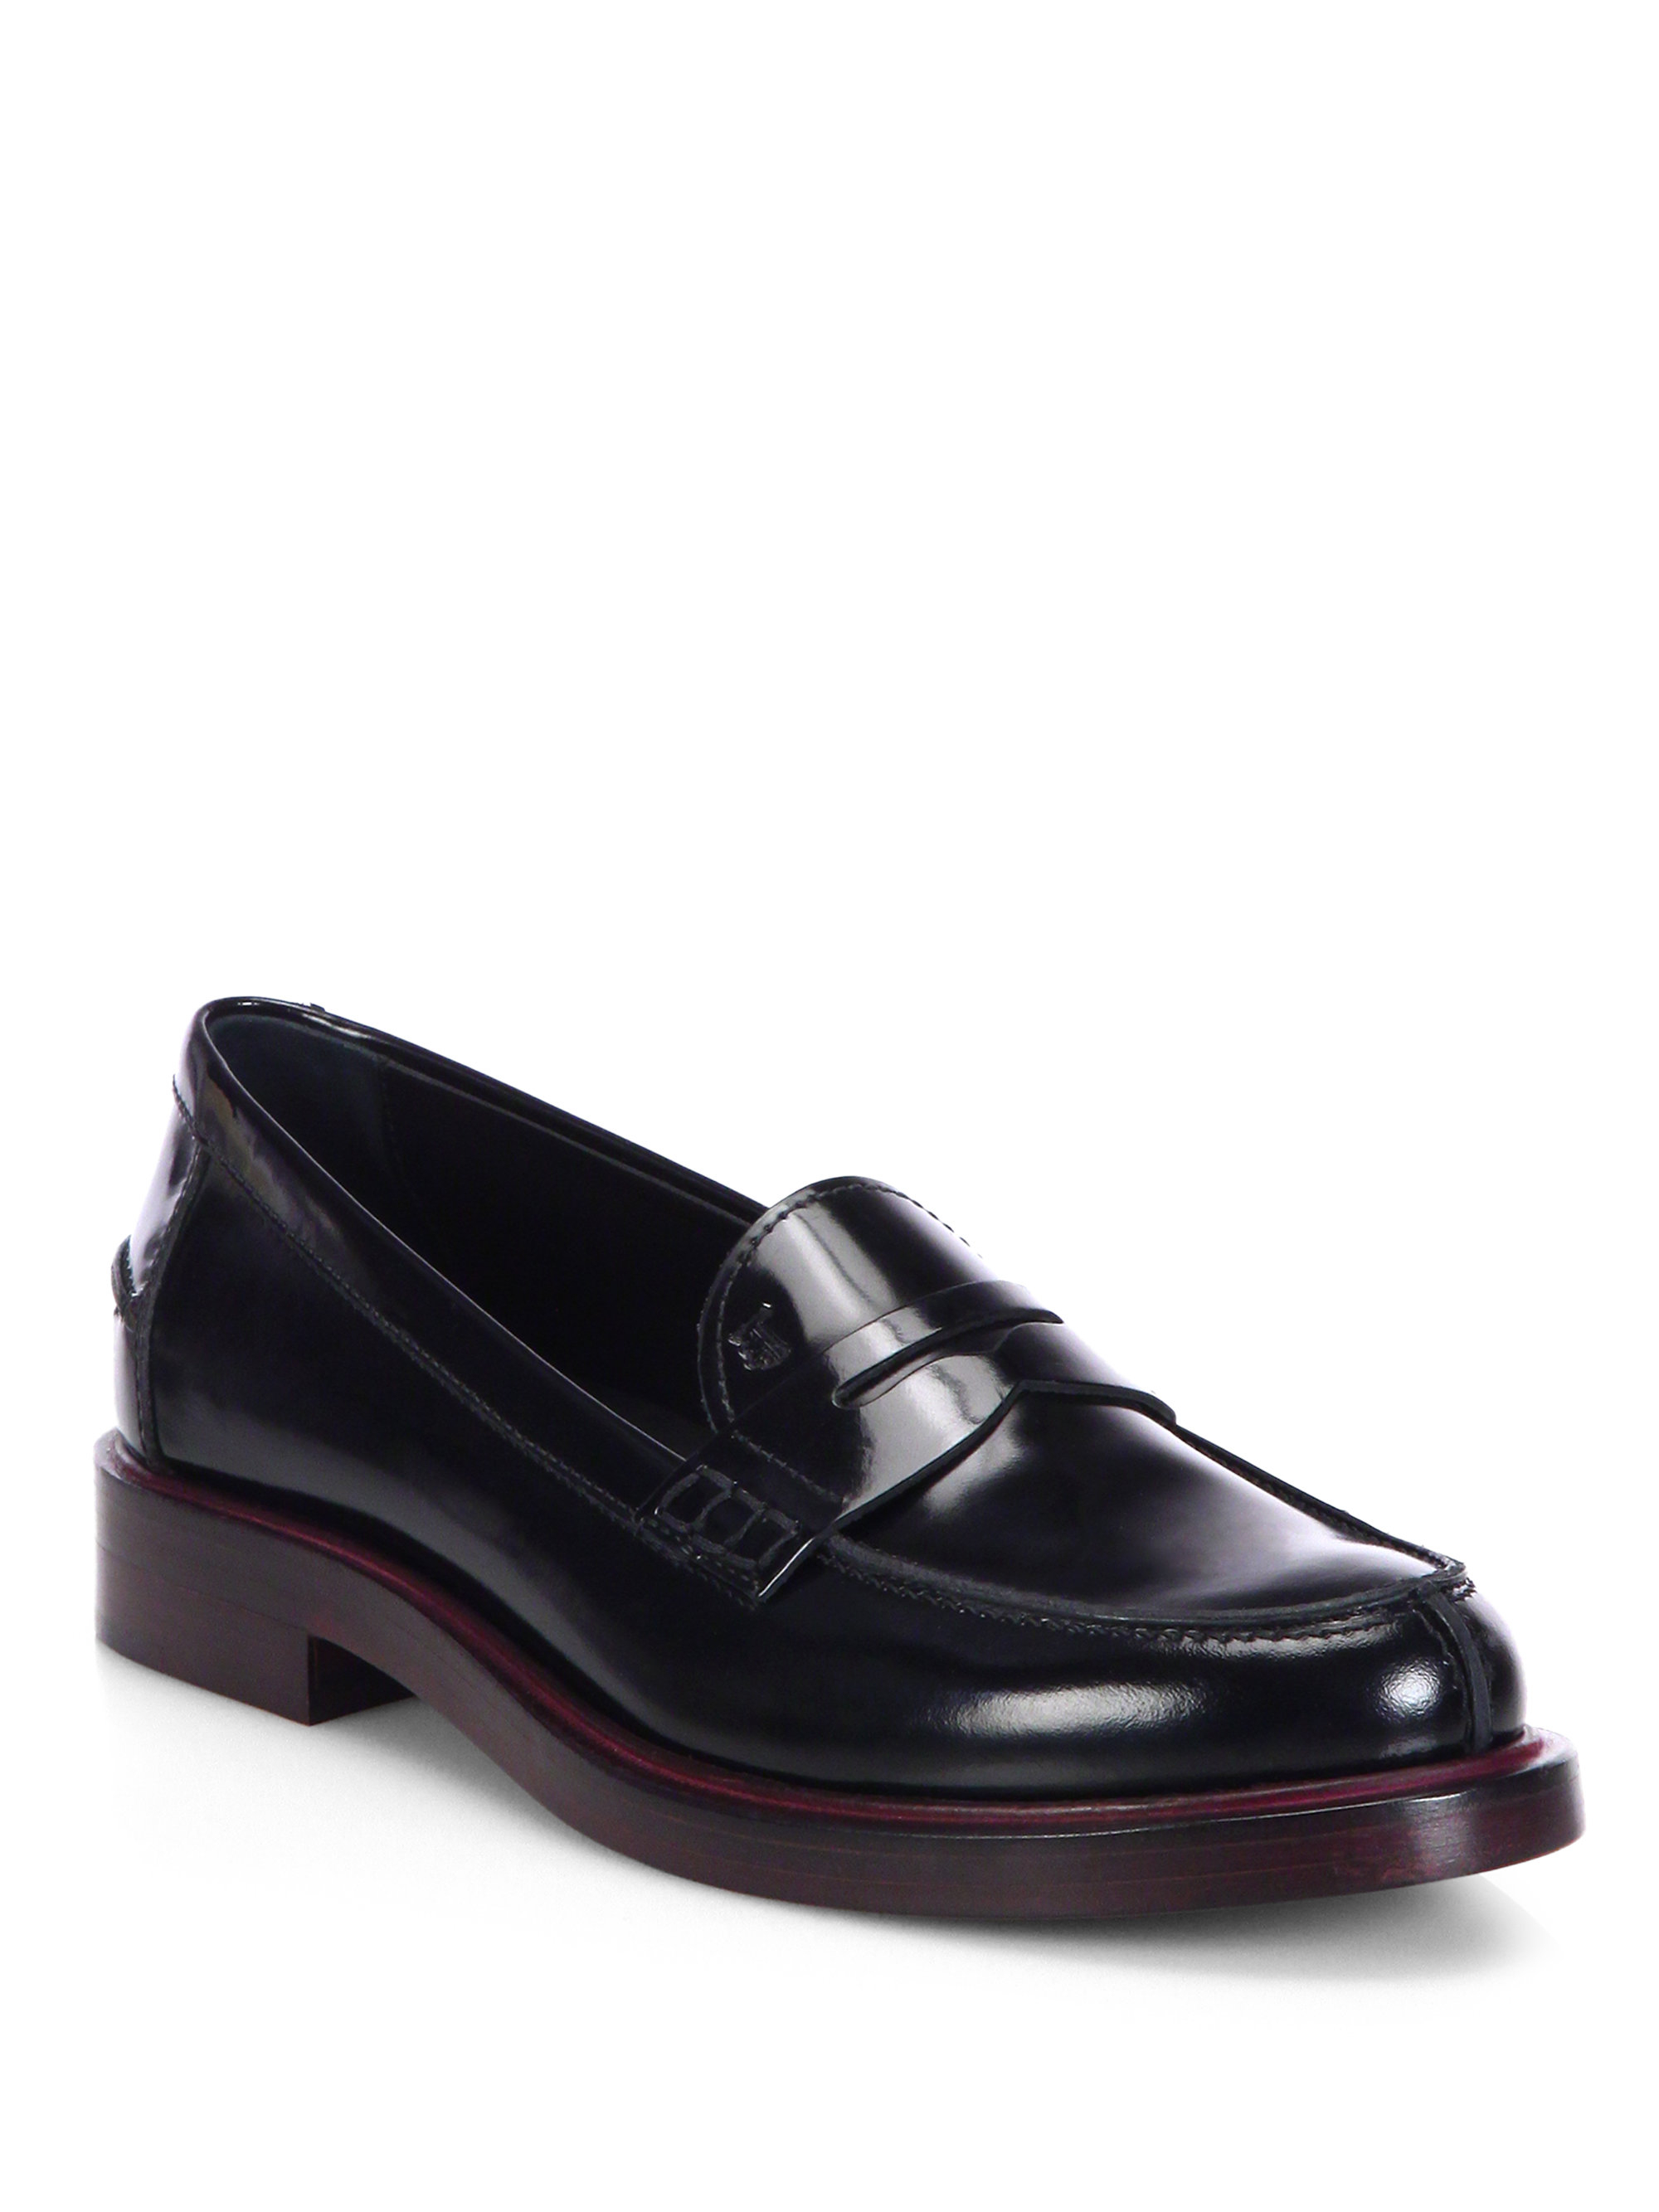 Tod's Patent Leather Loafers in Black | Lyst